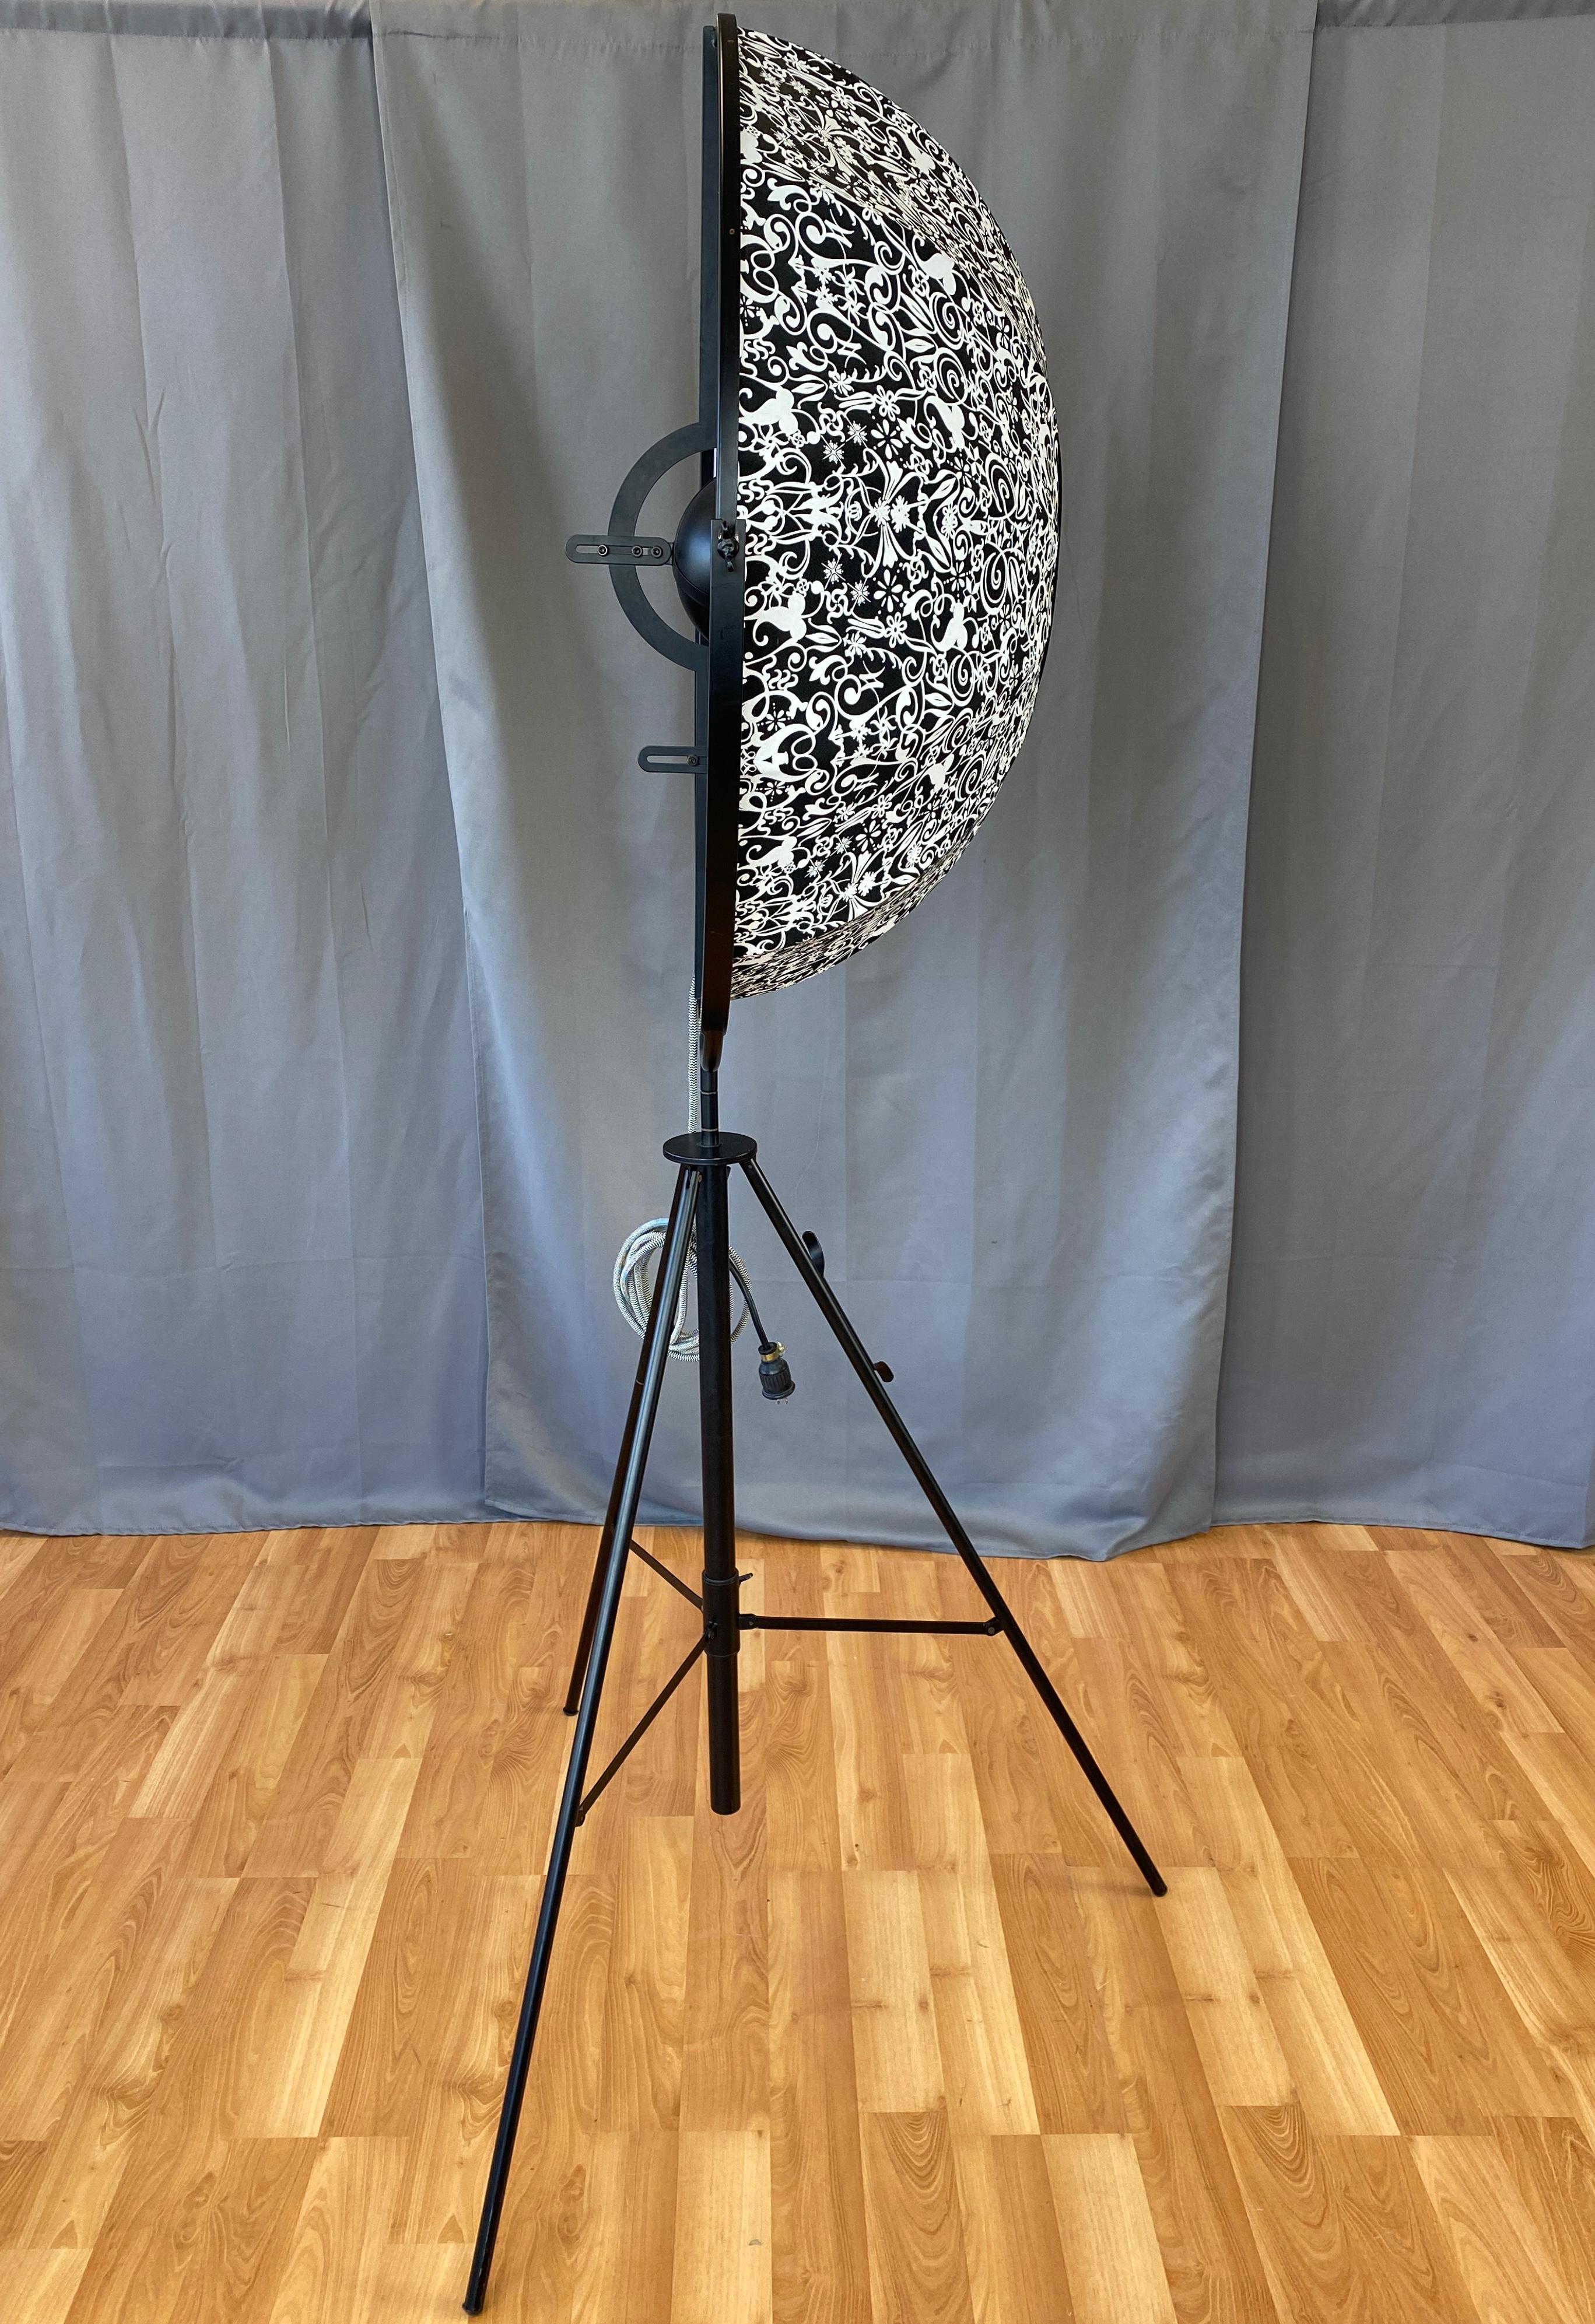 Designed by Mariano Fortuny y Madrazo in 1907. This one is circa 2004, and was made by Pallucco in Italy

First designed for stage lighting/new indirect lighting system for the stage. With its base coming from an idea of using a camera's tripod,